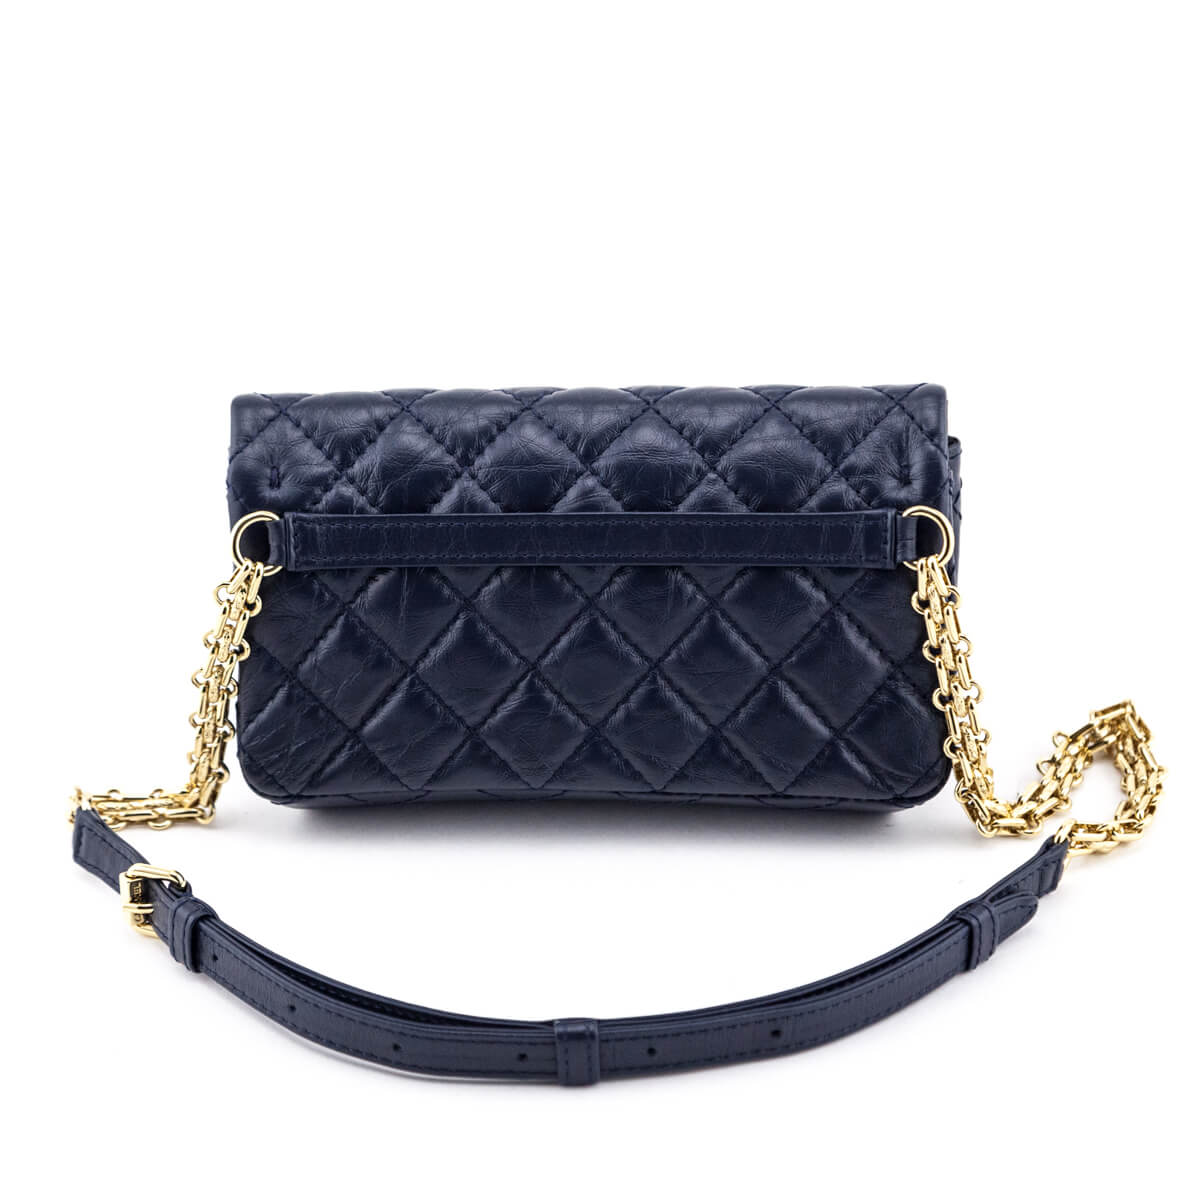 Chanel Marine Quilted Aged Calfskin Reissue Belt Bag - Love that Bag etc - Preowned Authentic Designer Handbags & Preloved Fashions